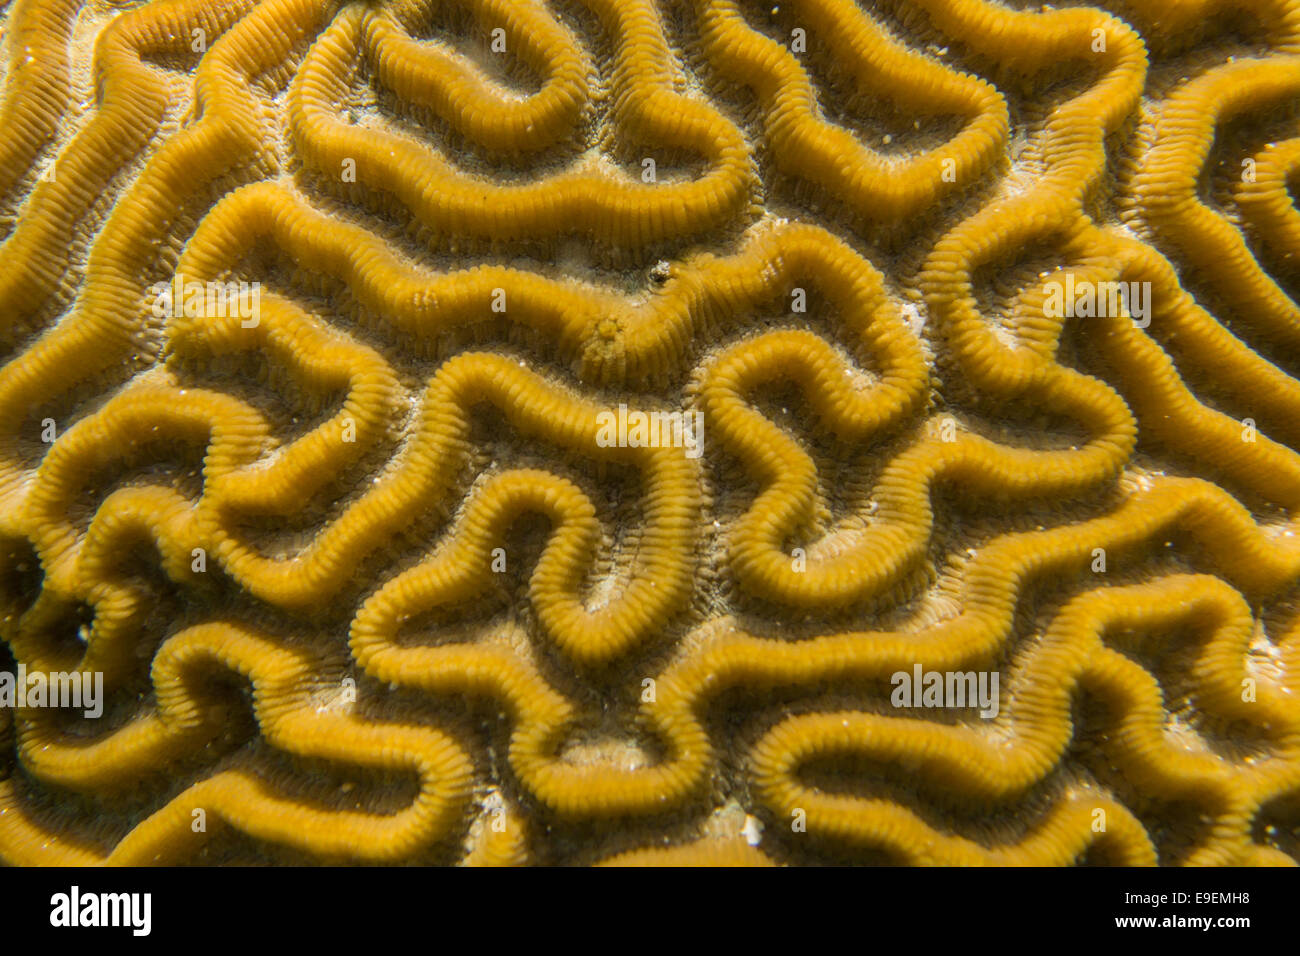 Details of the yellow pattern on brain coral Stock Photo